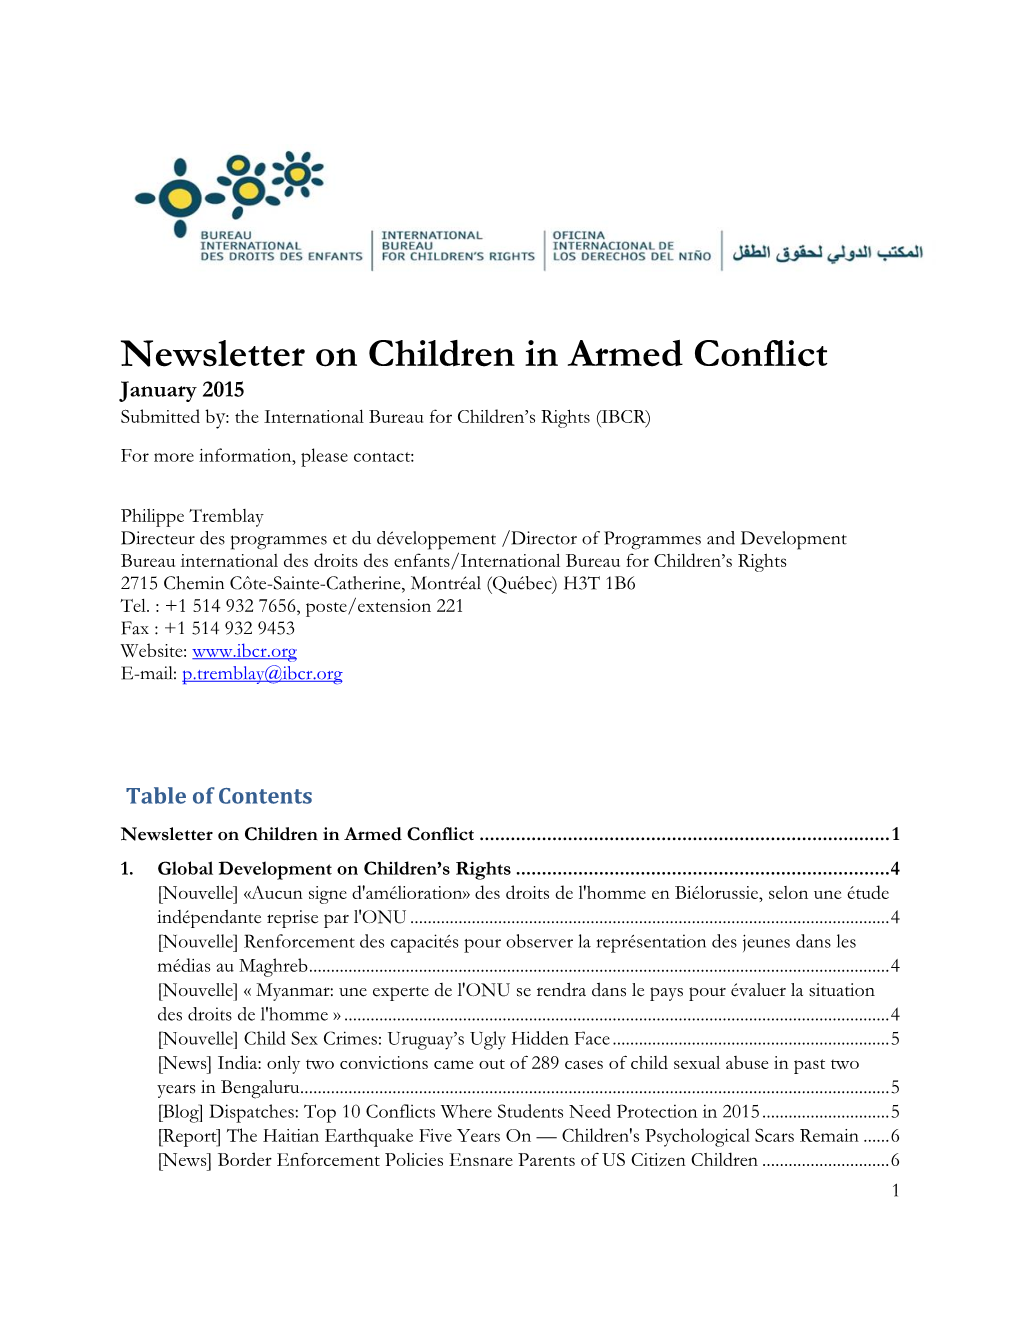 Newsletter on Children in Armed Conflict January 2015 Submitted By: the International Bureau for Children’S Rights (IBCR) for More Information, Please Contact